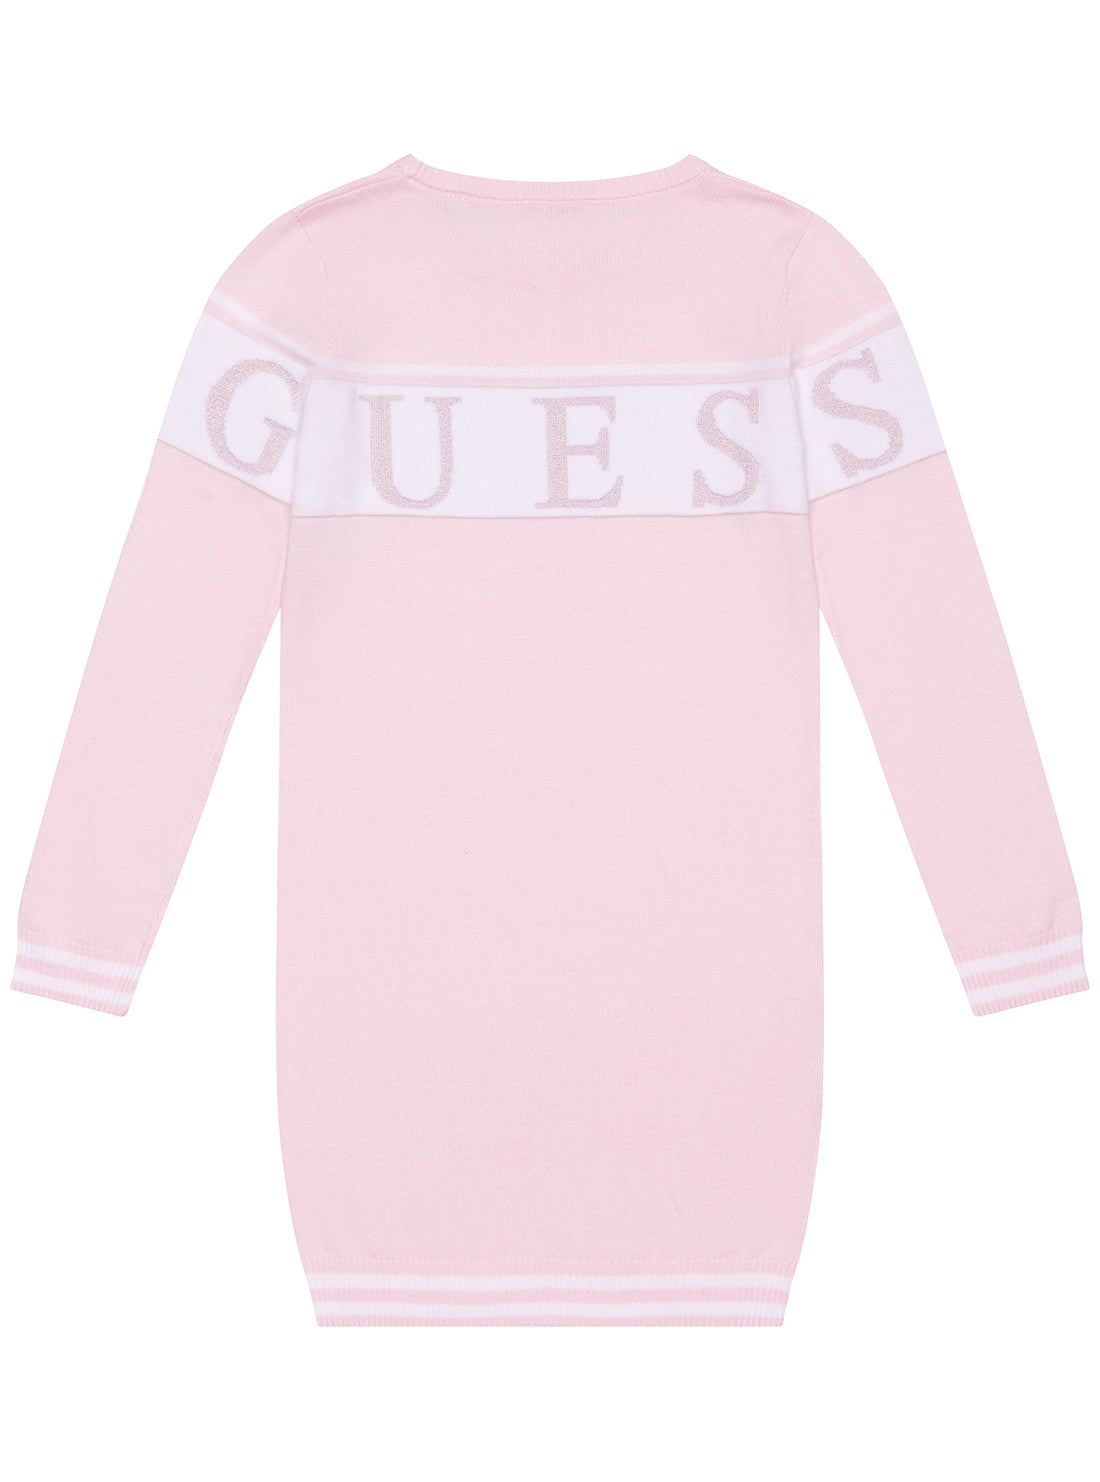 GUESS Pink Long Sleeve Knit Dress (2-7) back view